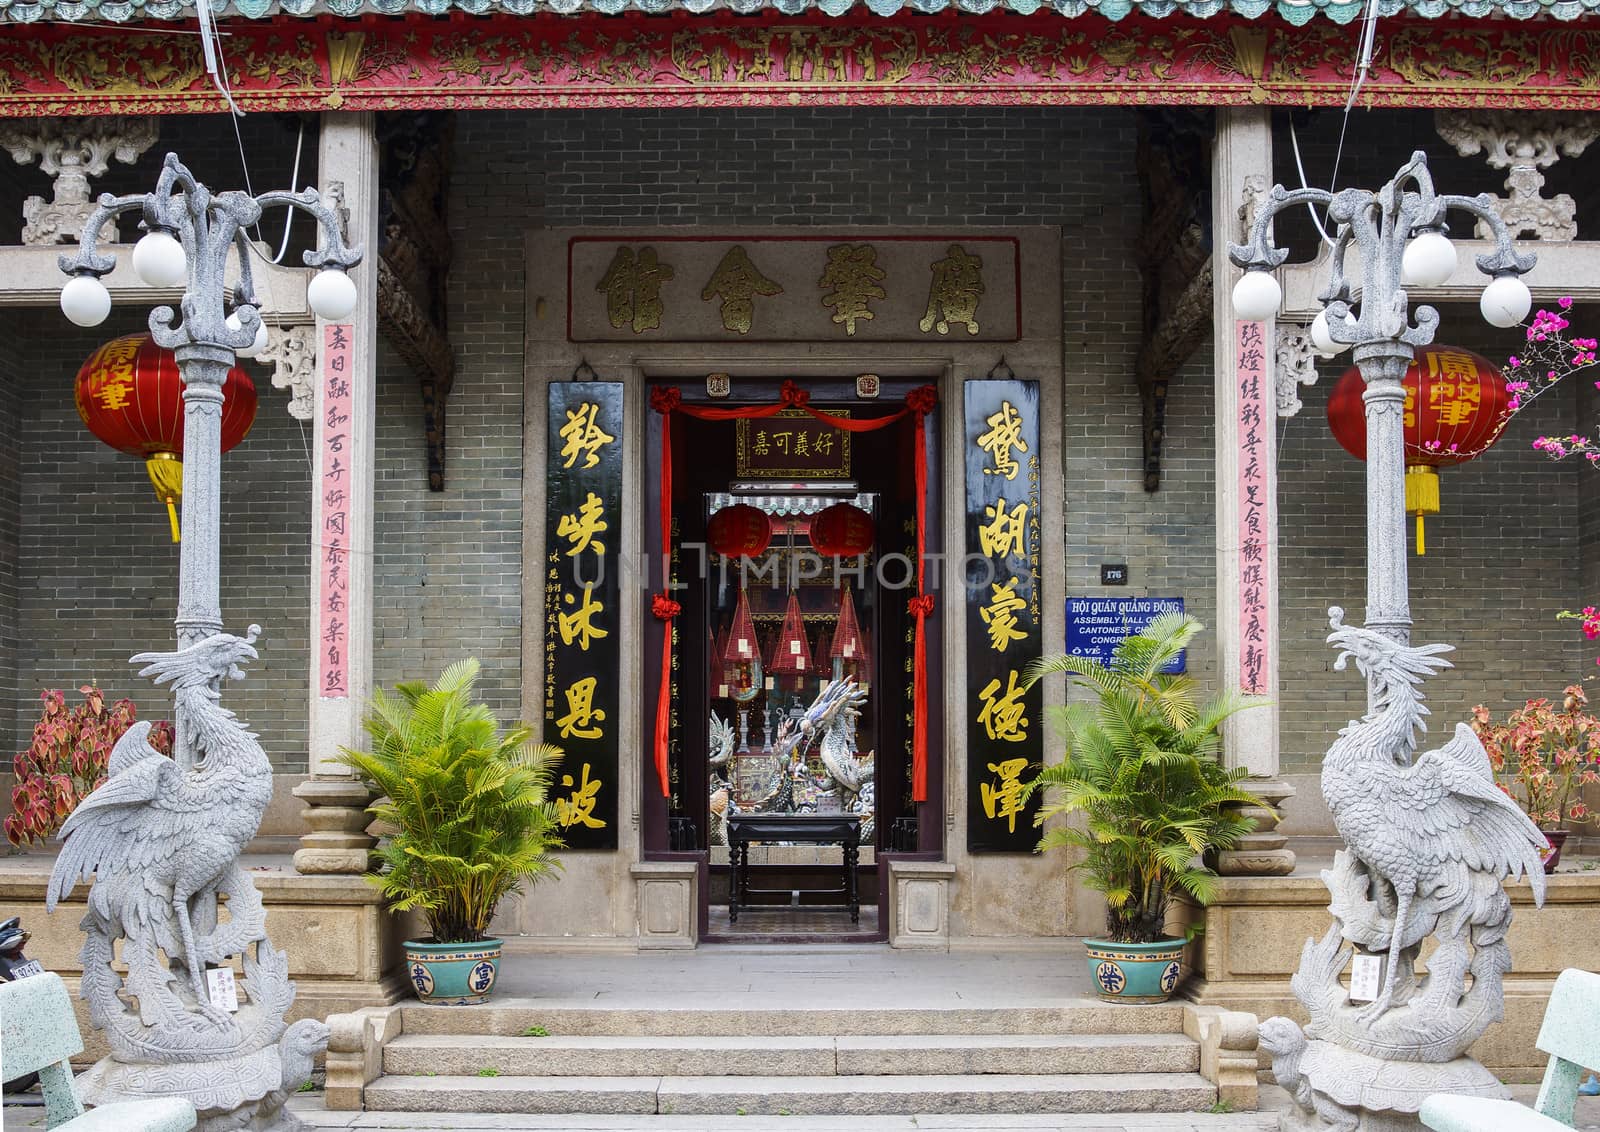 Entrance to the Quang Dong Chinese temple in Hoi An, Vietnam.